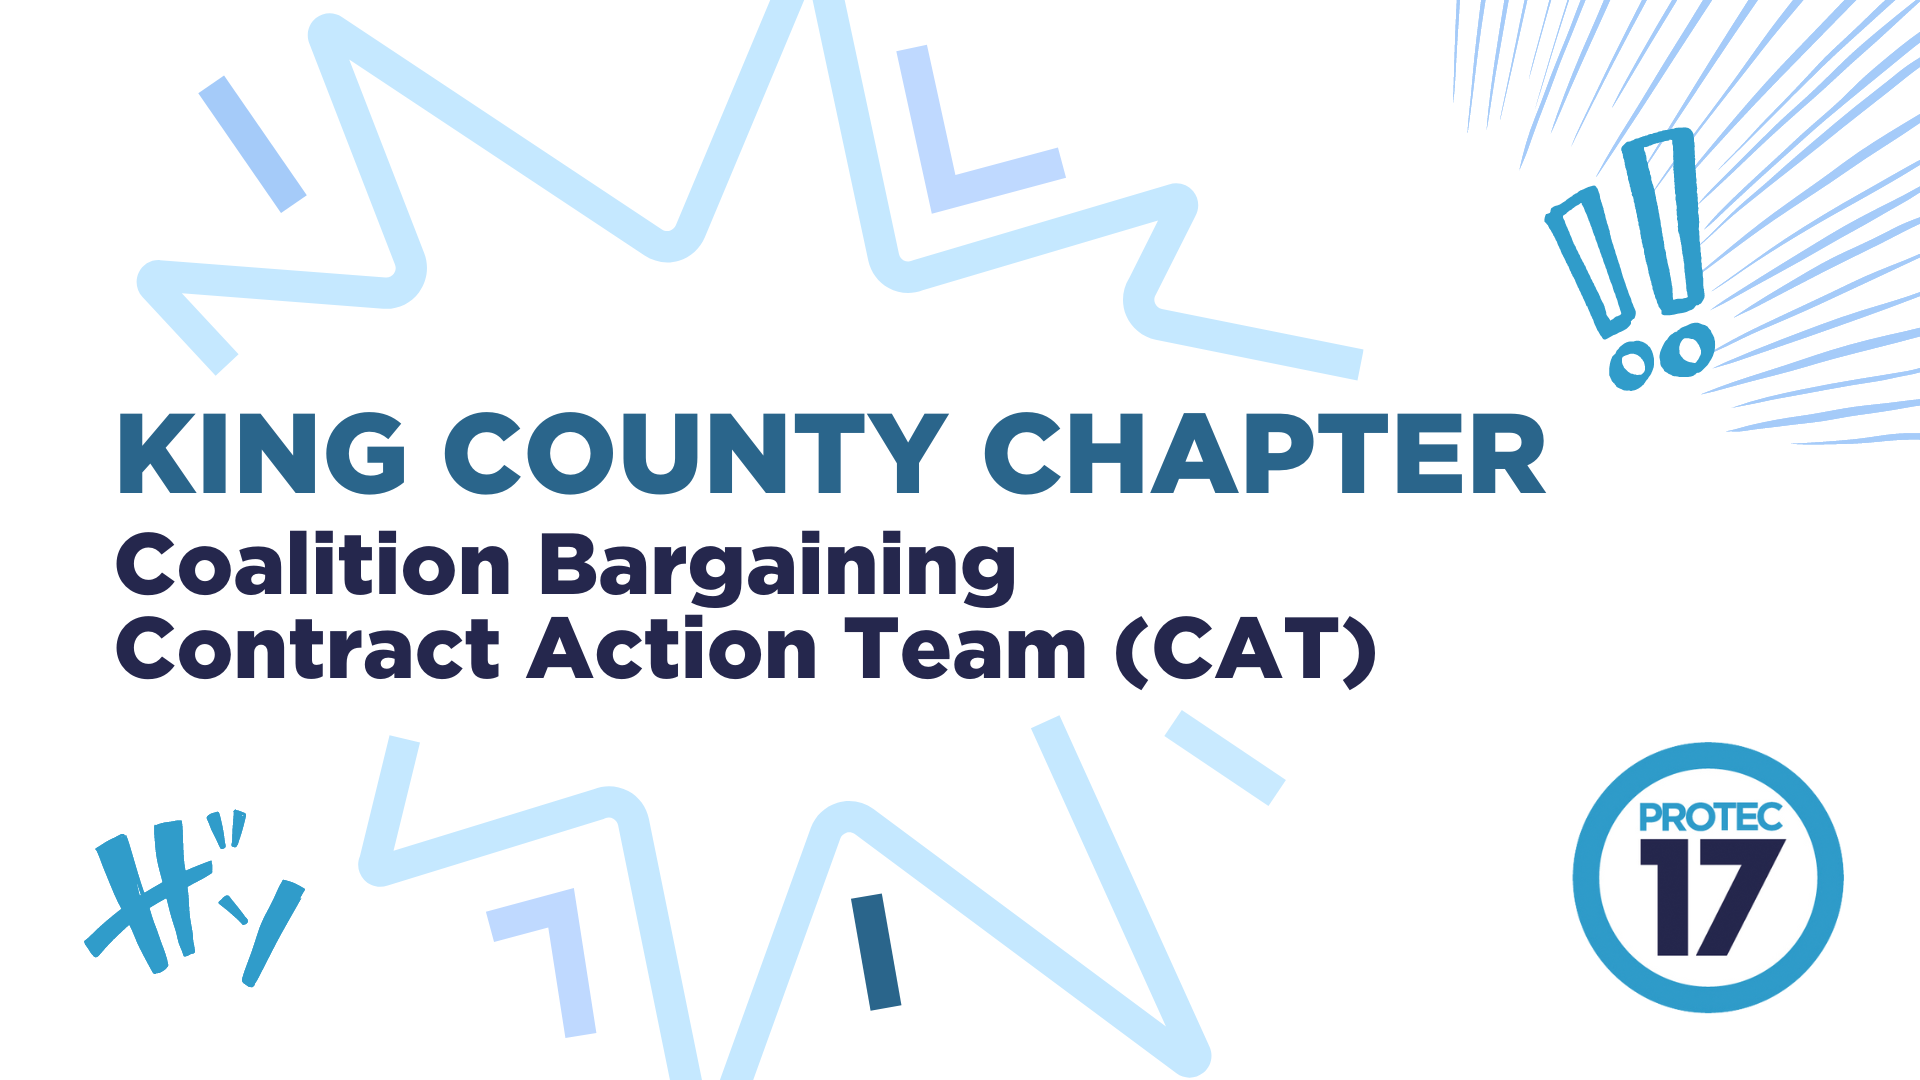 The text reads, "KING COUNTY CHAPTER | Coalition Bargaining | Contract Action Team (CAT)" surrounding by various cartoon-like superhero-inspired graphics. There is an explosion in the back, fighting symbols in the bottom right, and exclamation marks in the top right, all graphic novel style. The PROTEC17 logo is in the bottom right.